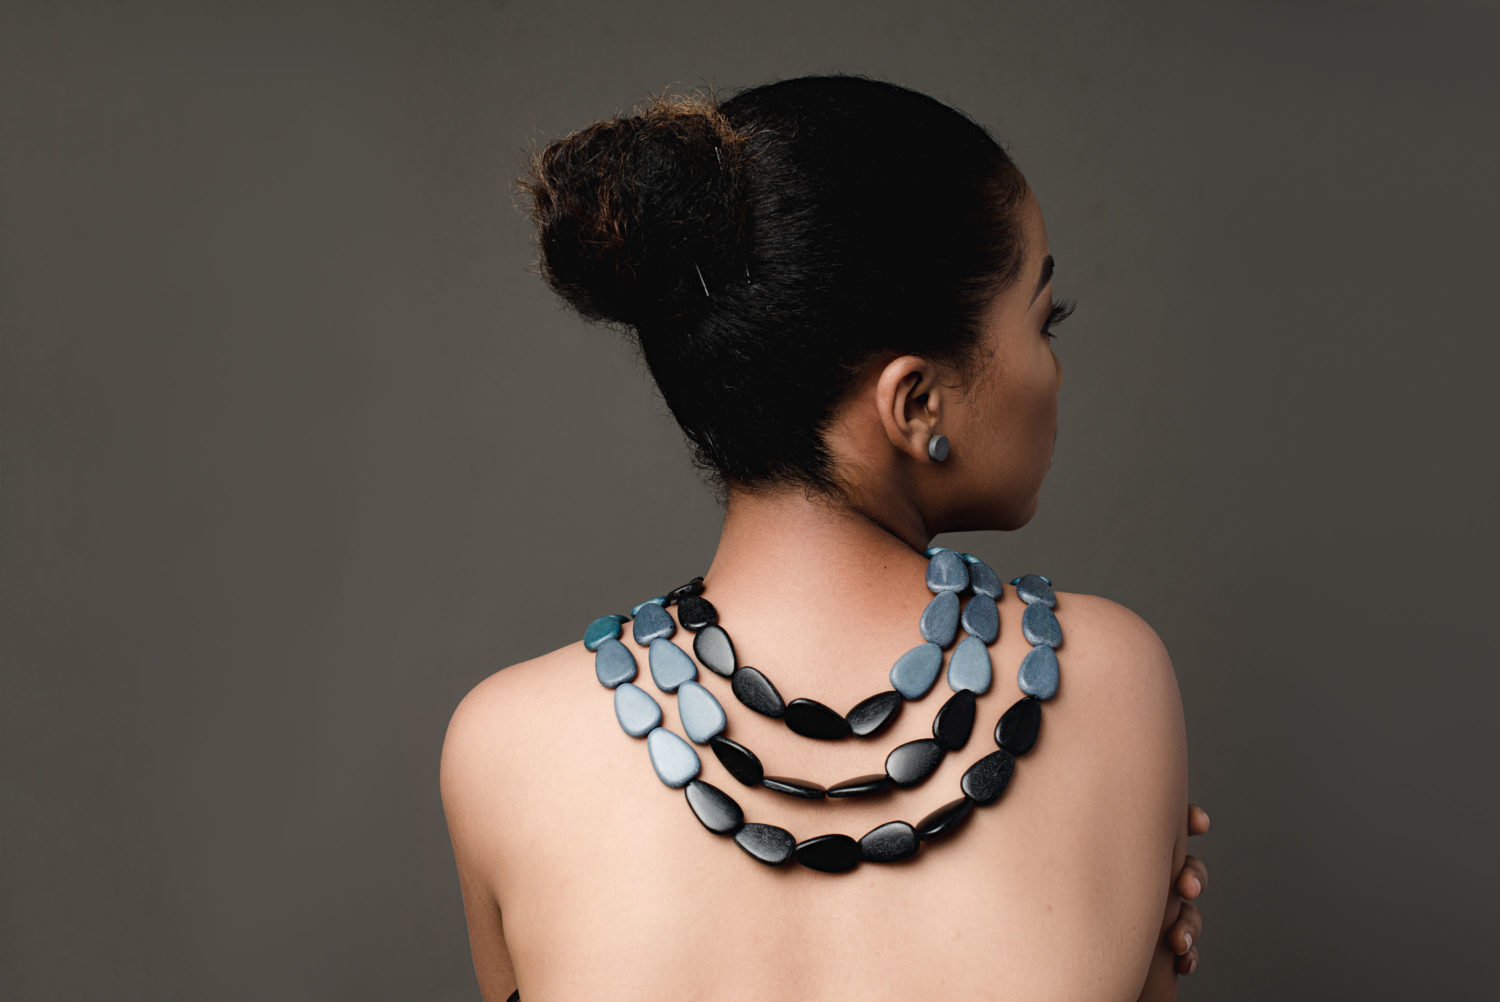 FF Fine Jewellery Just Unveiled A Range Of Accessories You’ll Want to Wear With Every Outfit